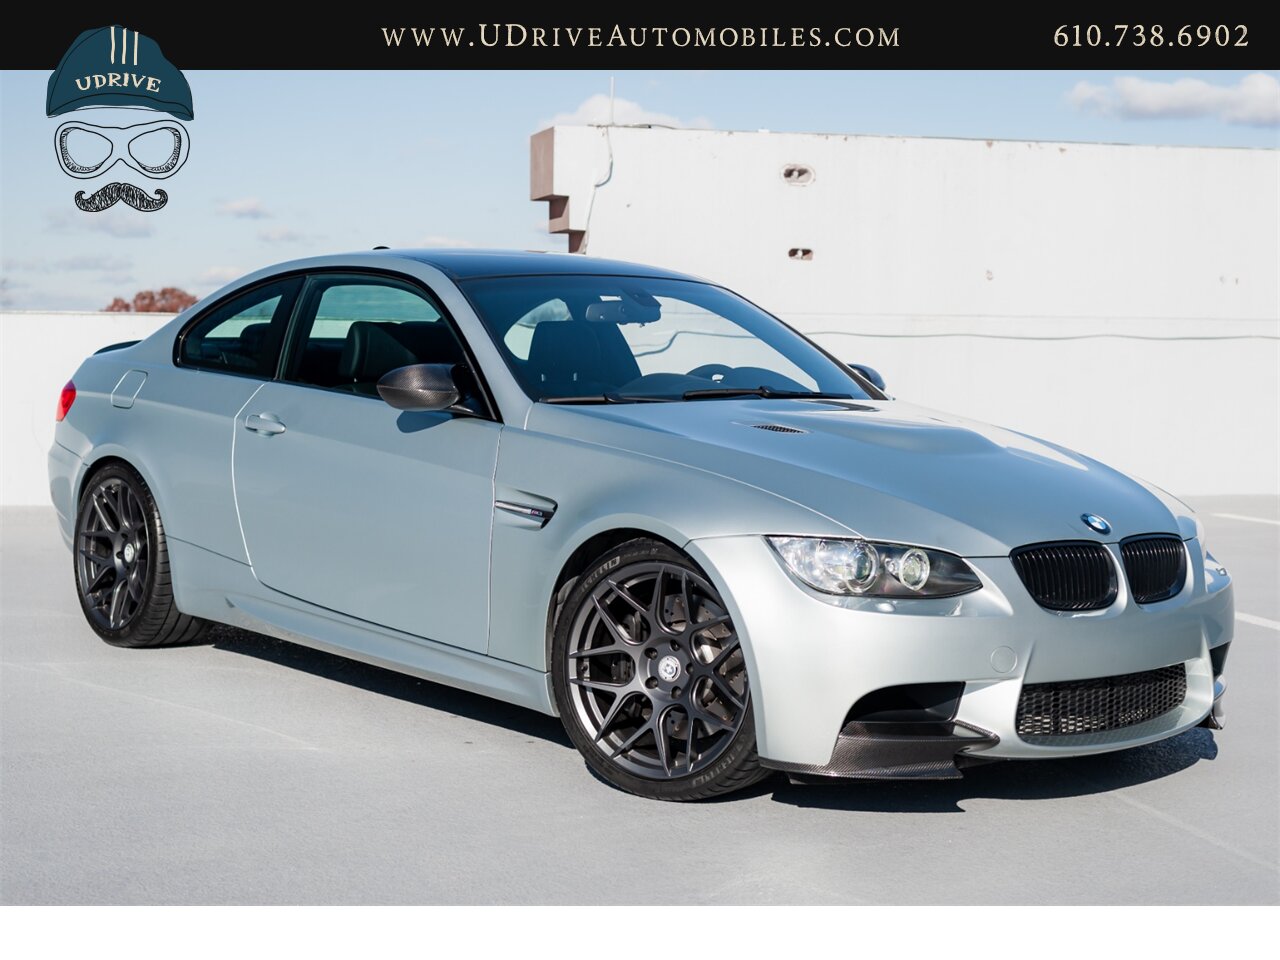 2008 BMW M3 Dinan S3-R M3 1 of 36 Produced DCT  1 Owner Full Service History 4.6L Stroker V8 - Photo 4 - West Chester, PA 19382